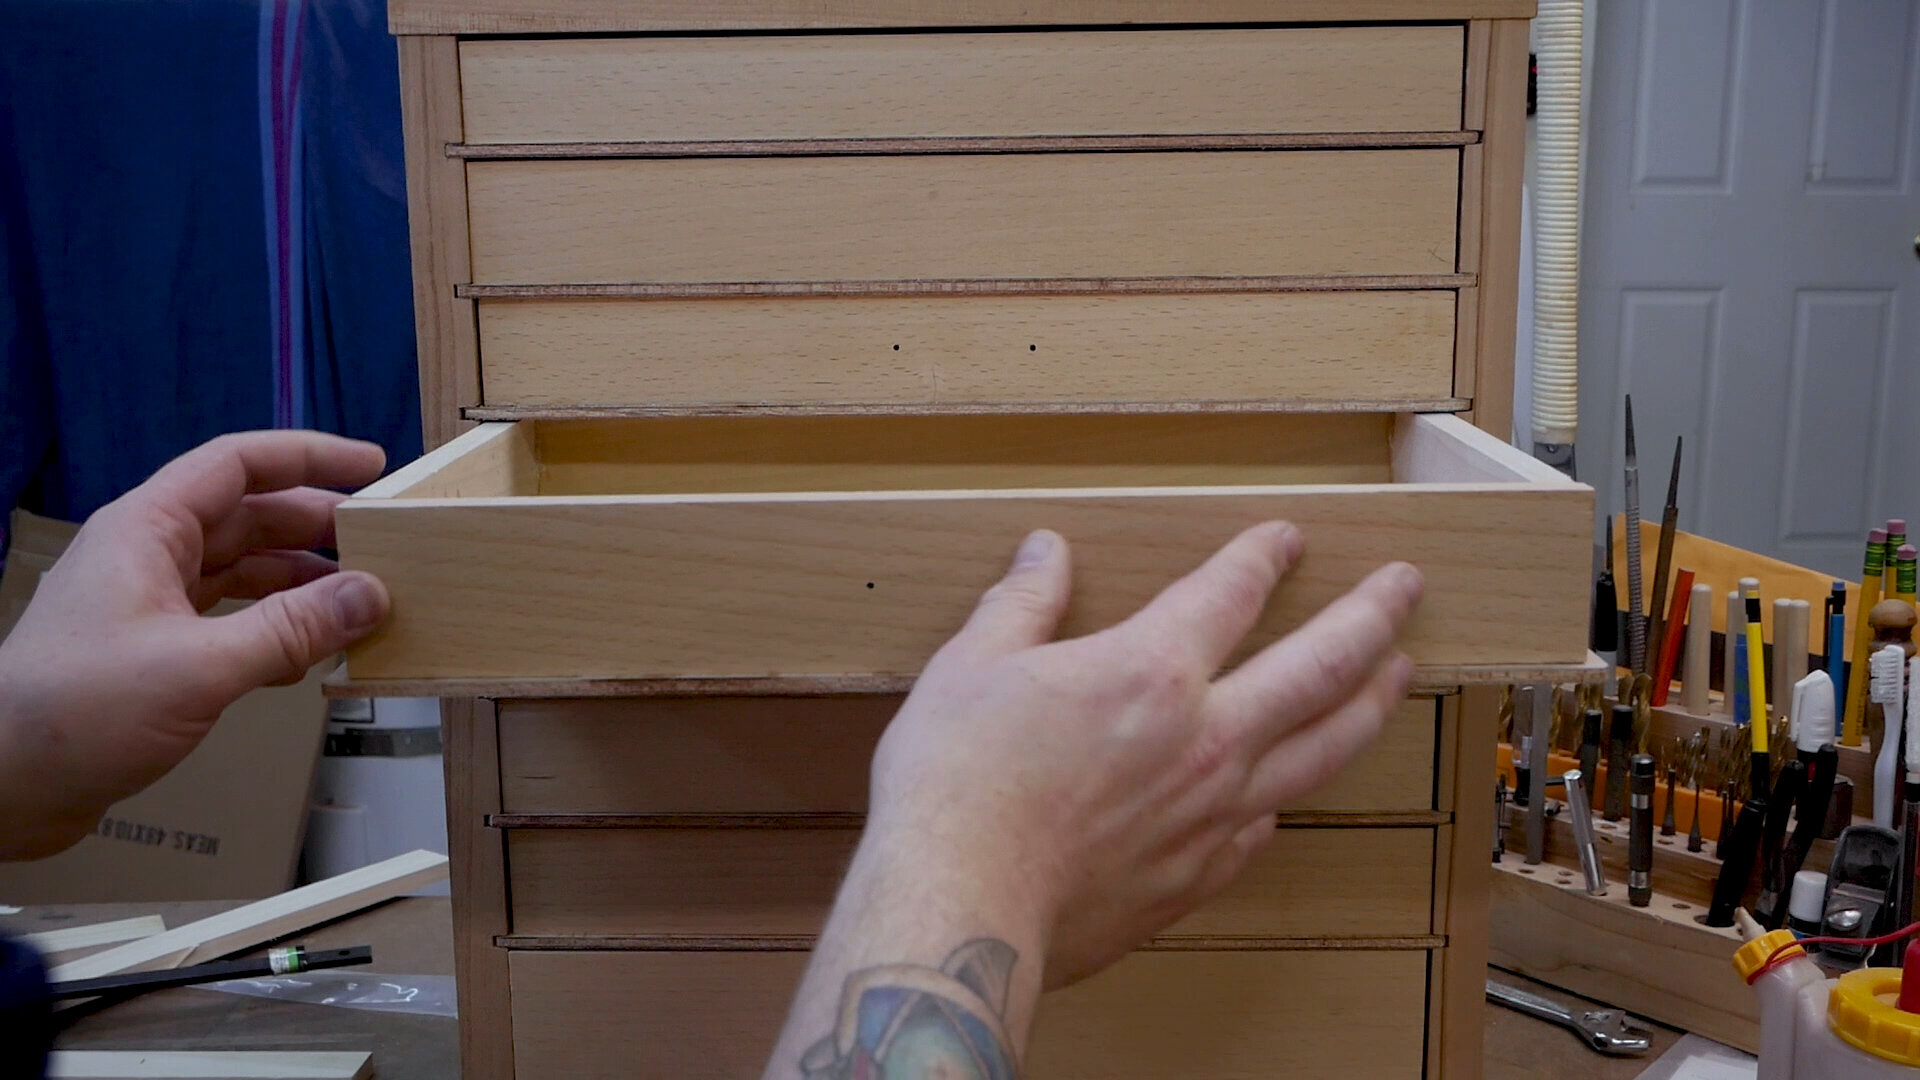  Before the glue sets, i double check the drawer will fit in it’s intended place before clamping it down. 